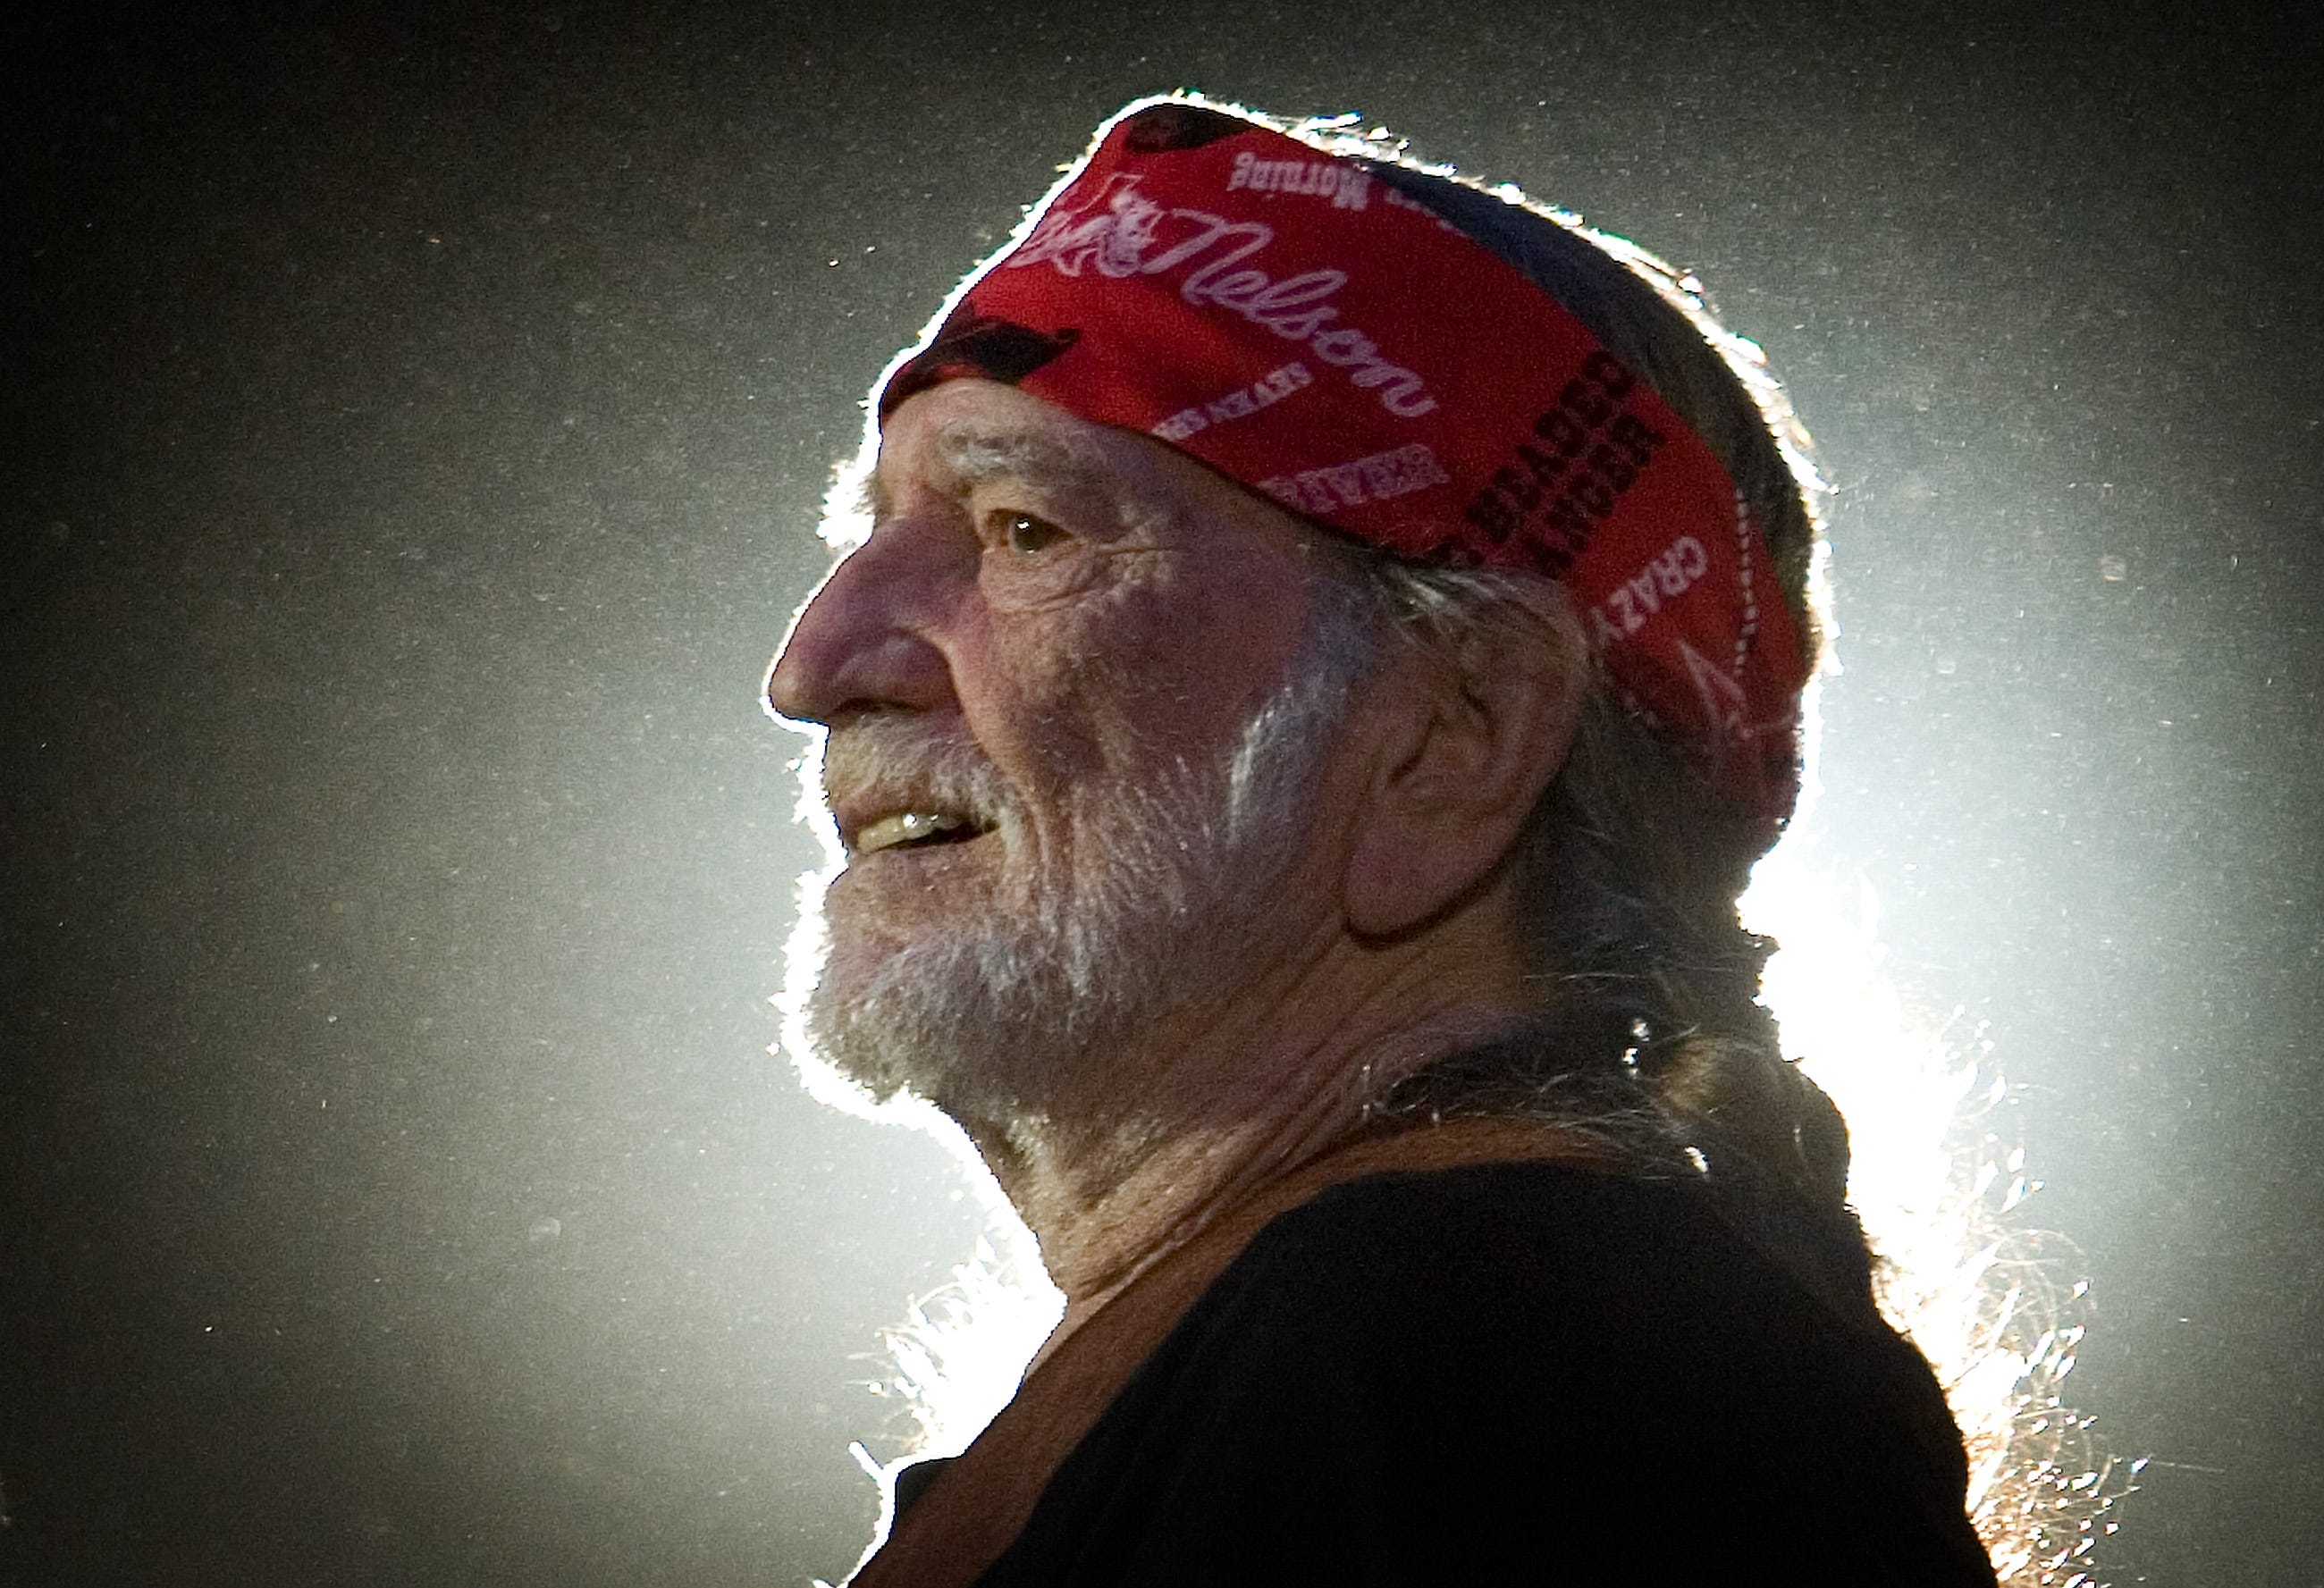 Willie Nelson performs at the Star of Texas Fair and Rodeo on Tuesday March 4, 2008.